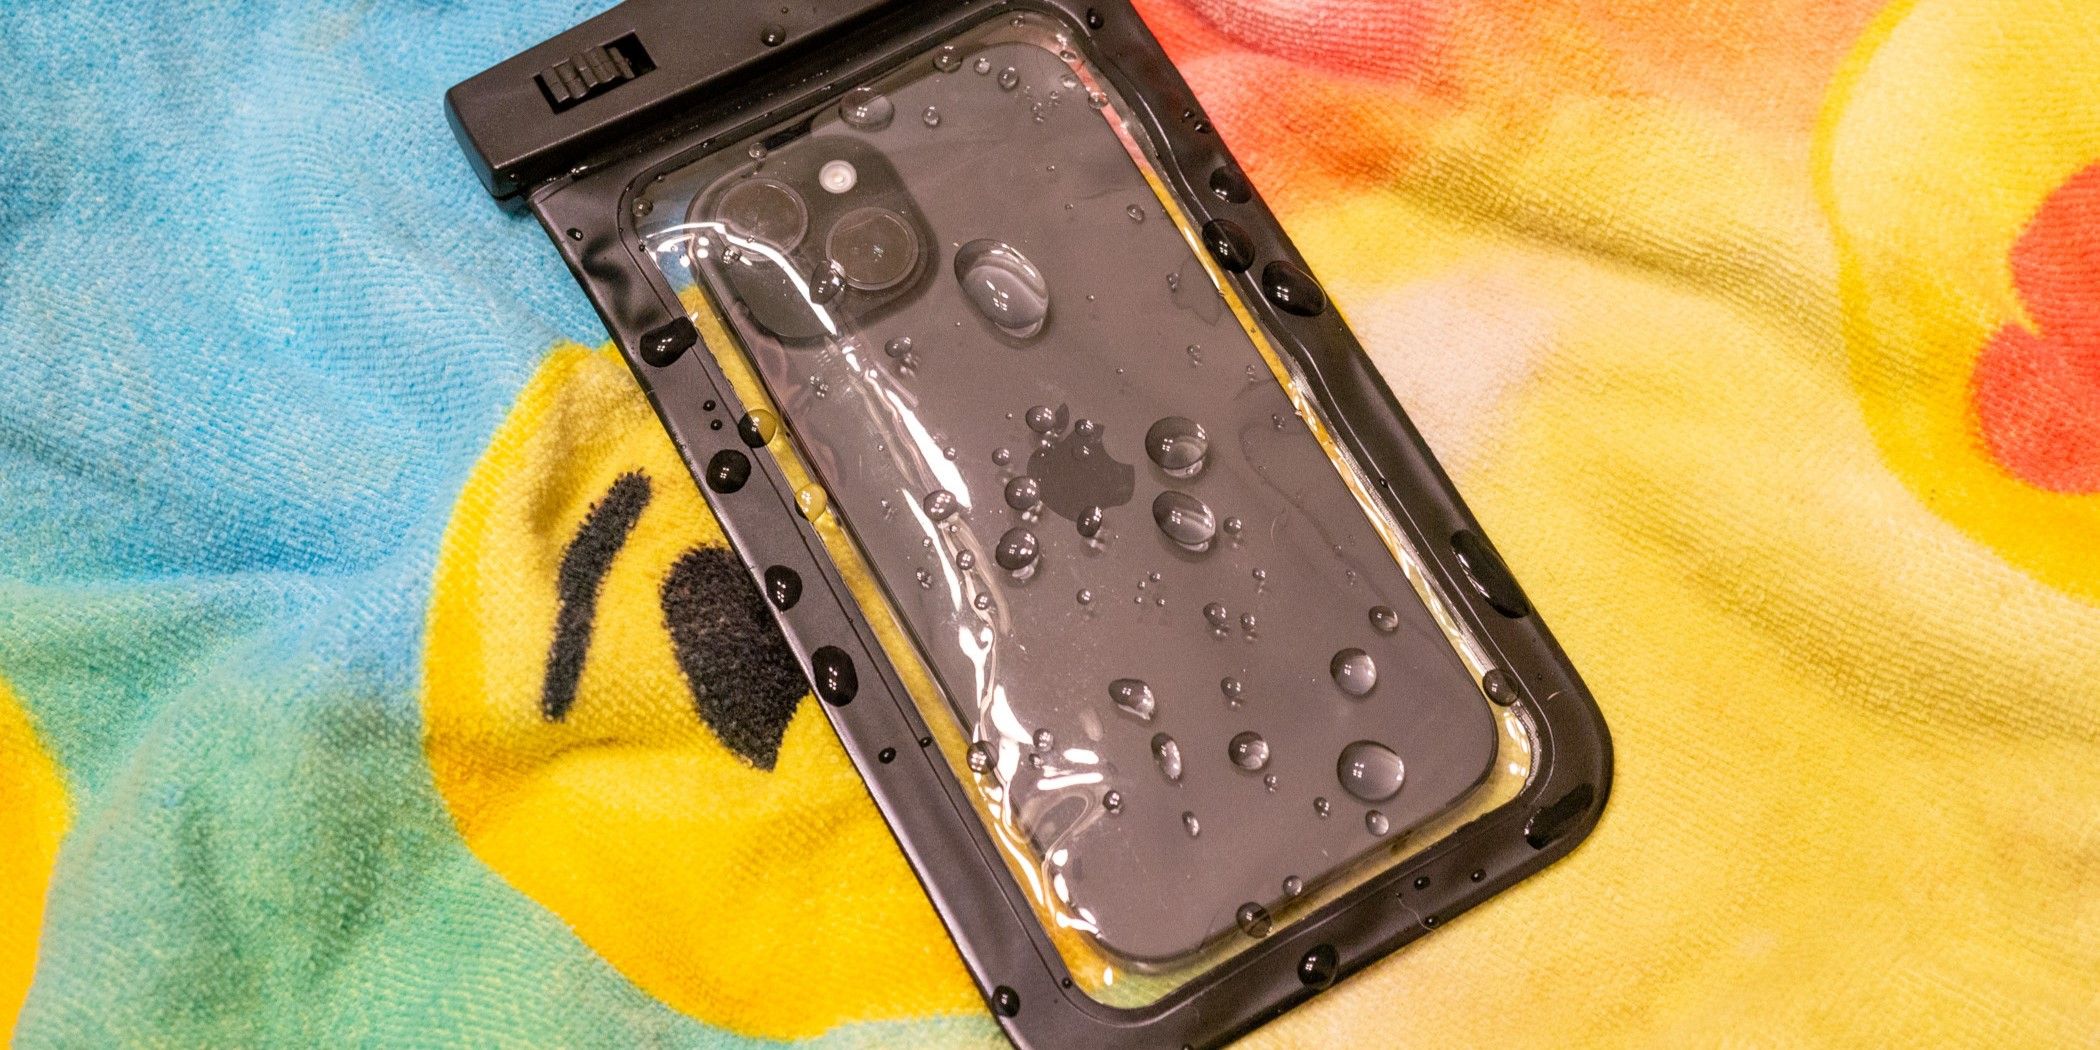 Best waterproof phone case: 12 of the best options for iPhone and Android